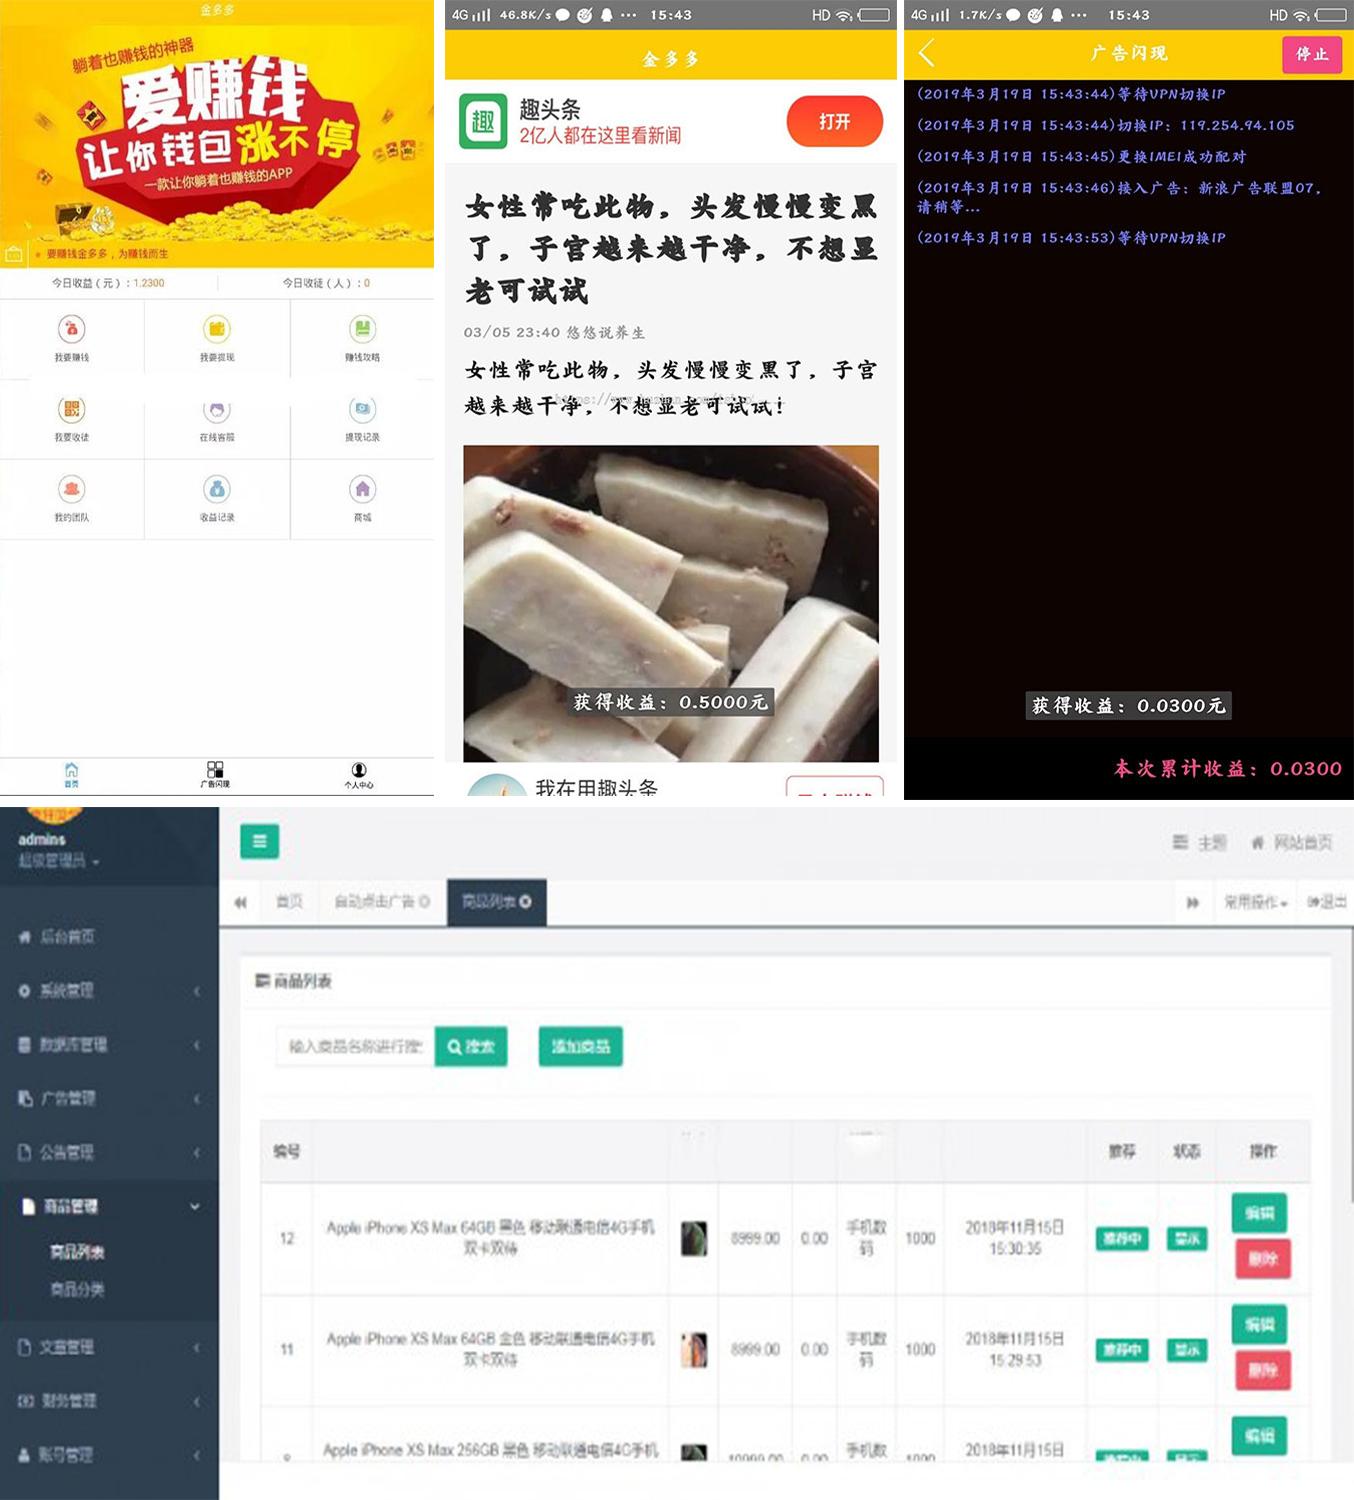  The source code of the advertising machine system automatically reads the advertisement and hangs up to make money APP